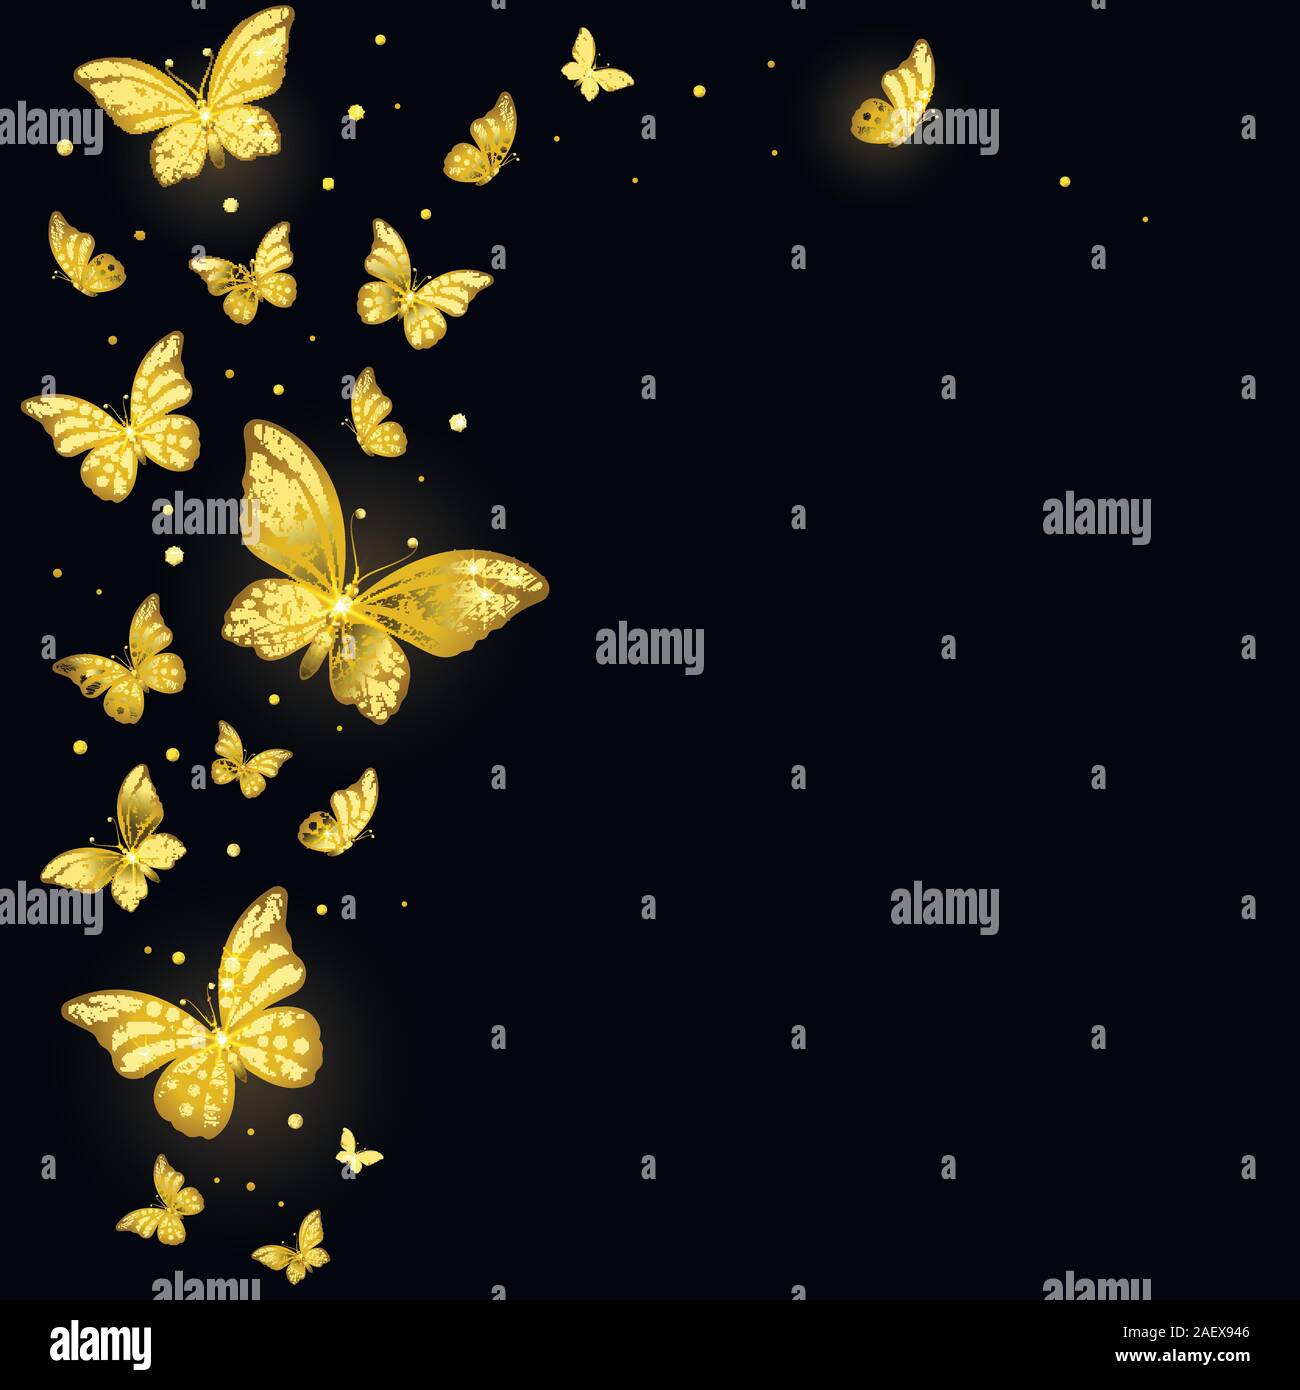 shiny decorative golden butterflies on a black background Stock Vector